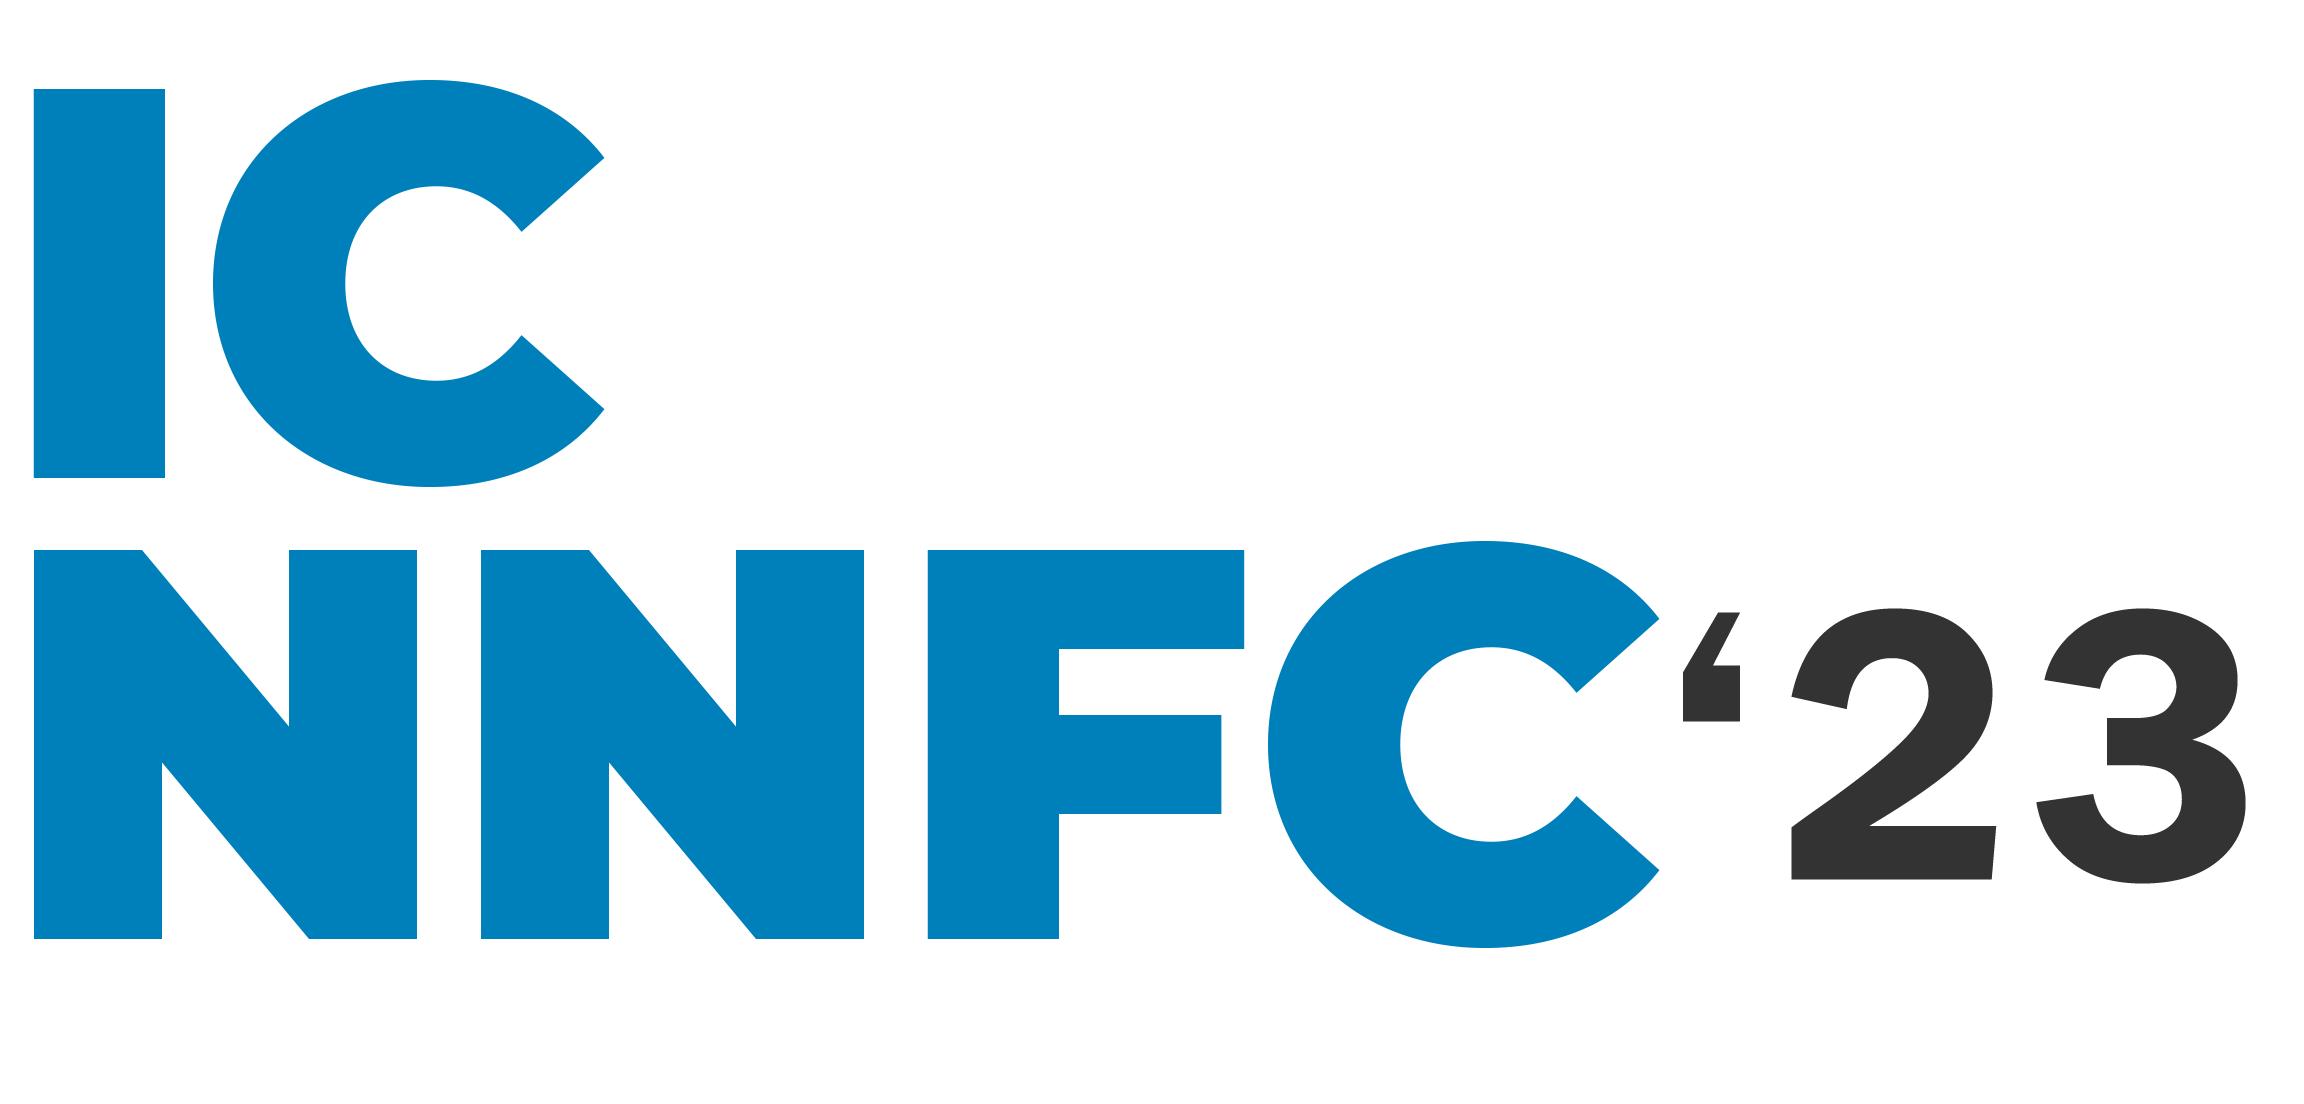 8th International Conference on Nanomaterials, Nanodevices, Fabrication and Characterization (ICNNFC) 